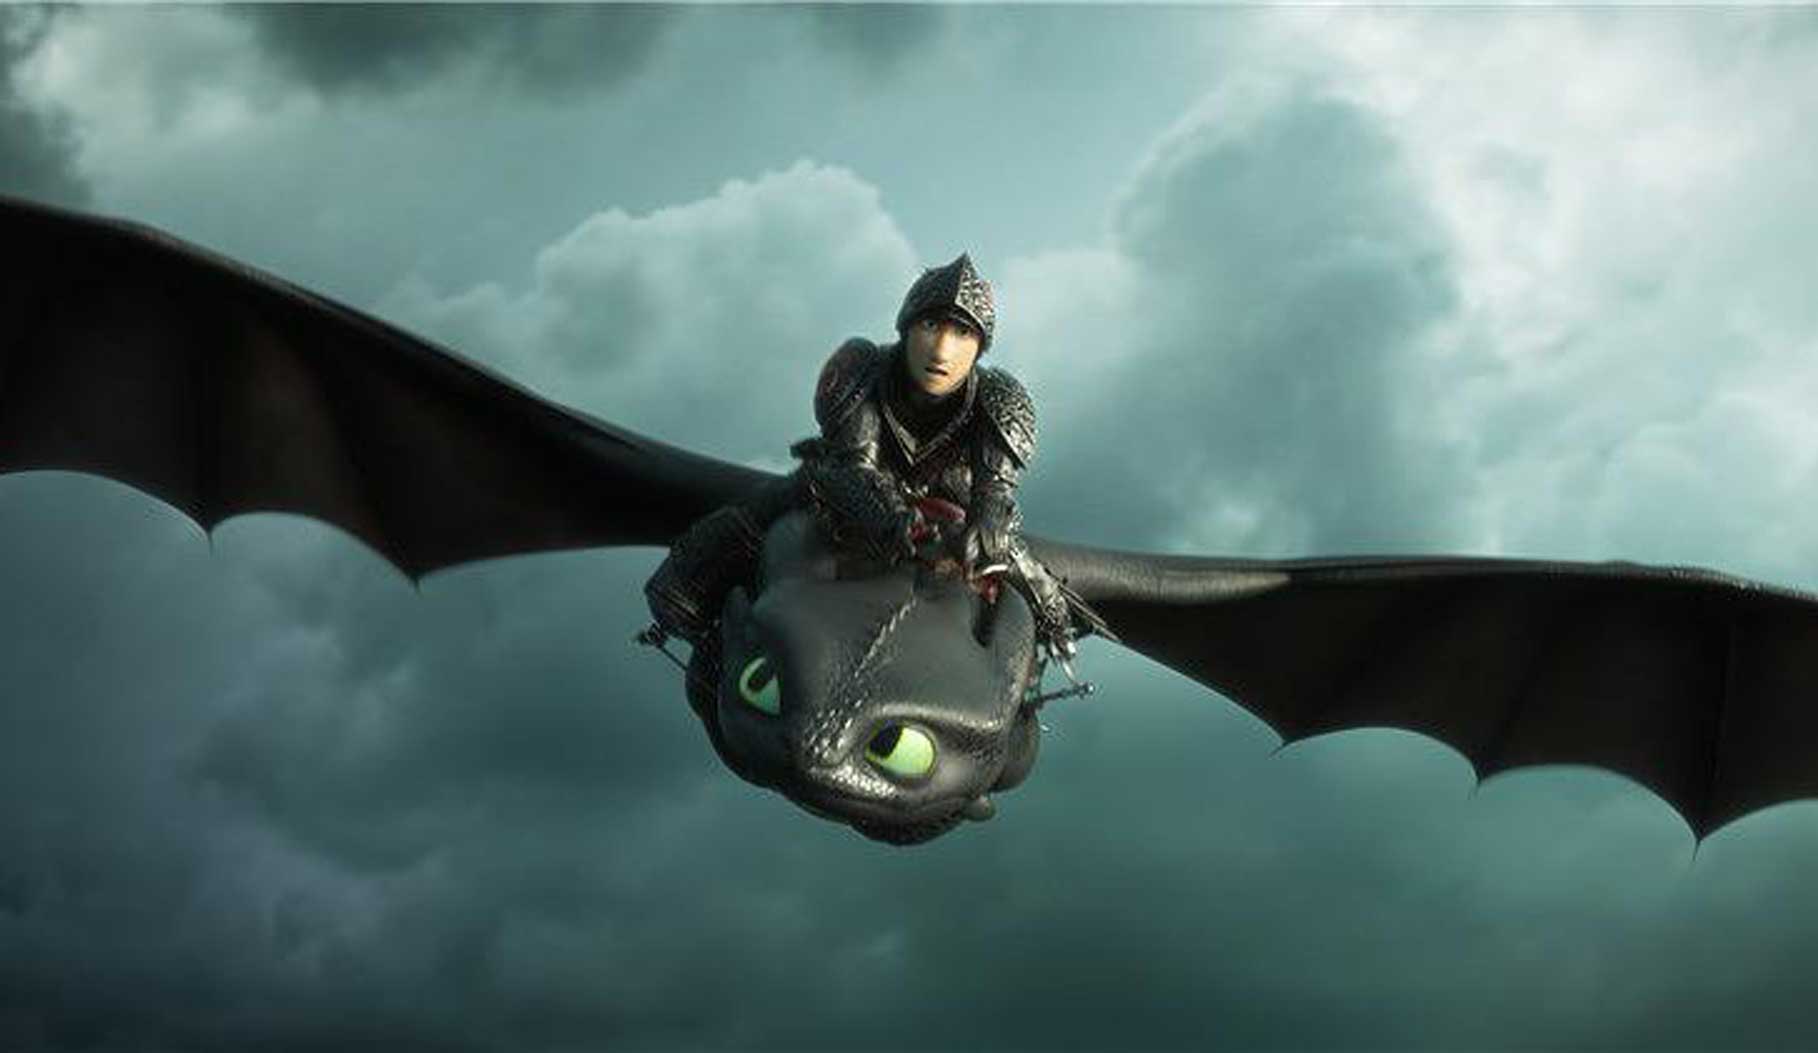 can the dragon from how to train your dragon 3 eat my ass? it